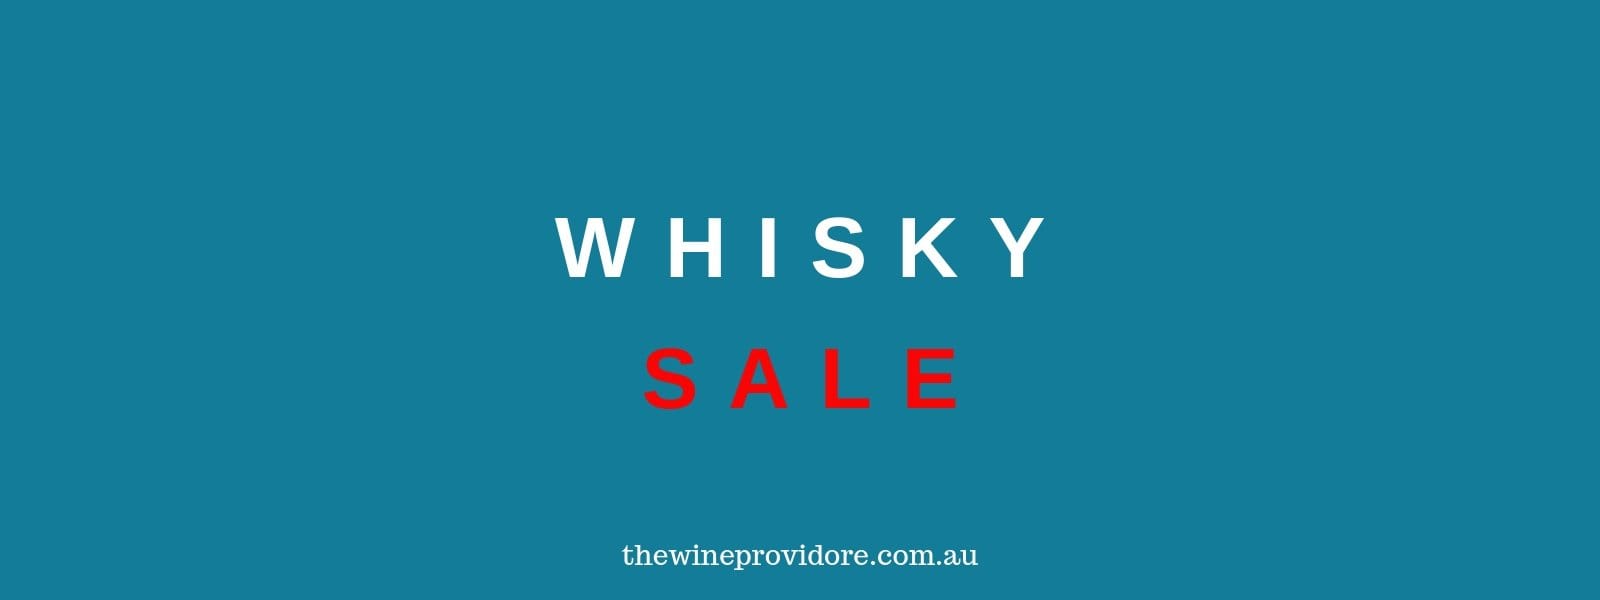 Enter the Whisky Sale